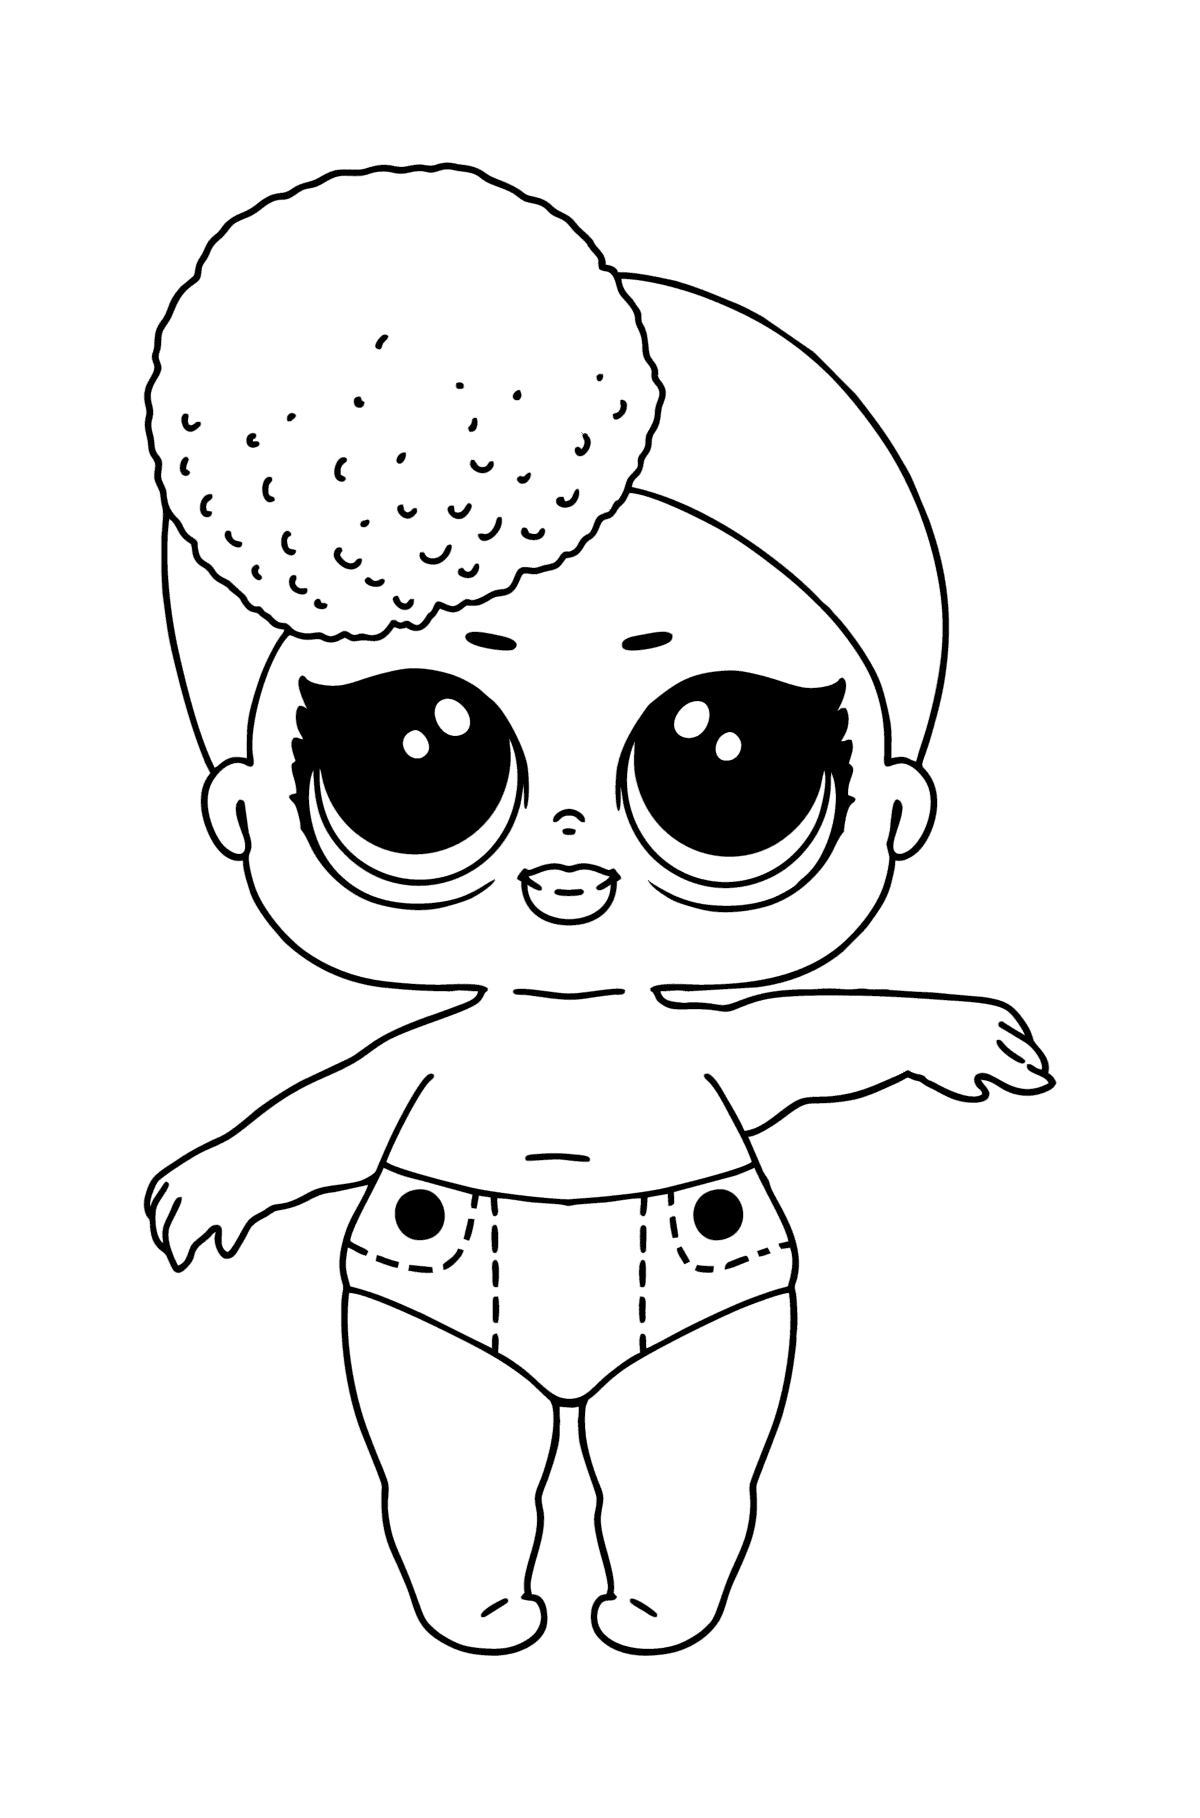 Coloring page LOL LIL Independent - Coloring Pages for Kids